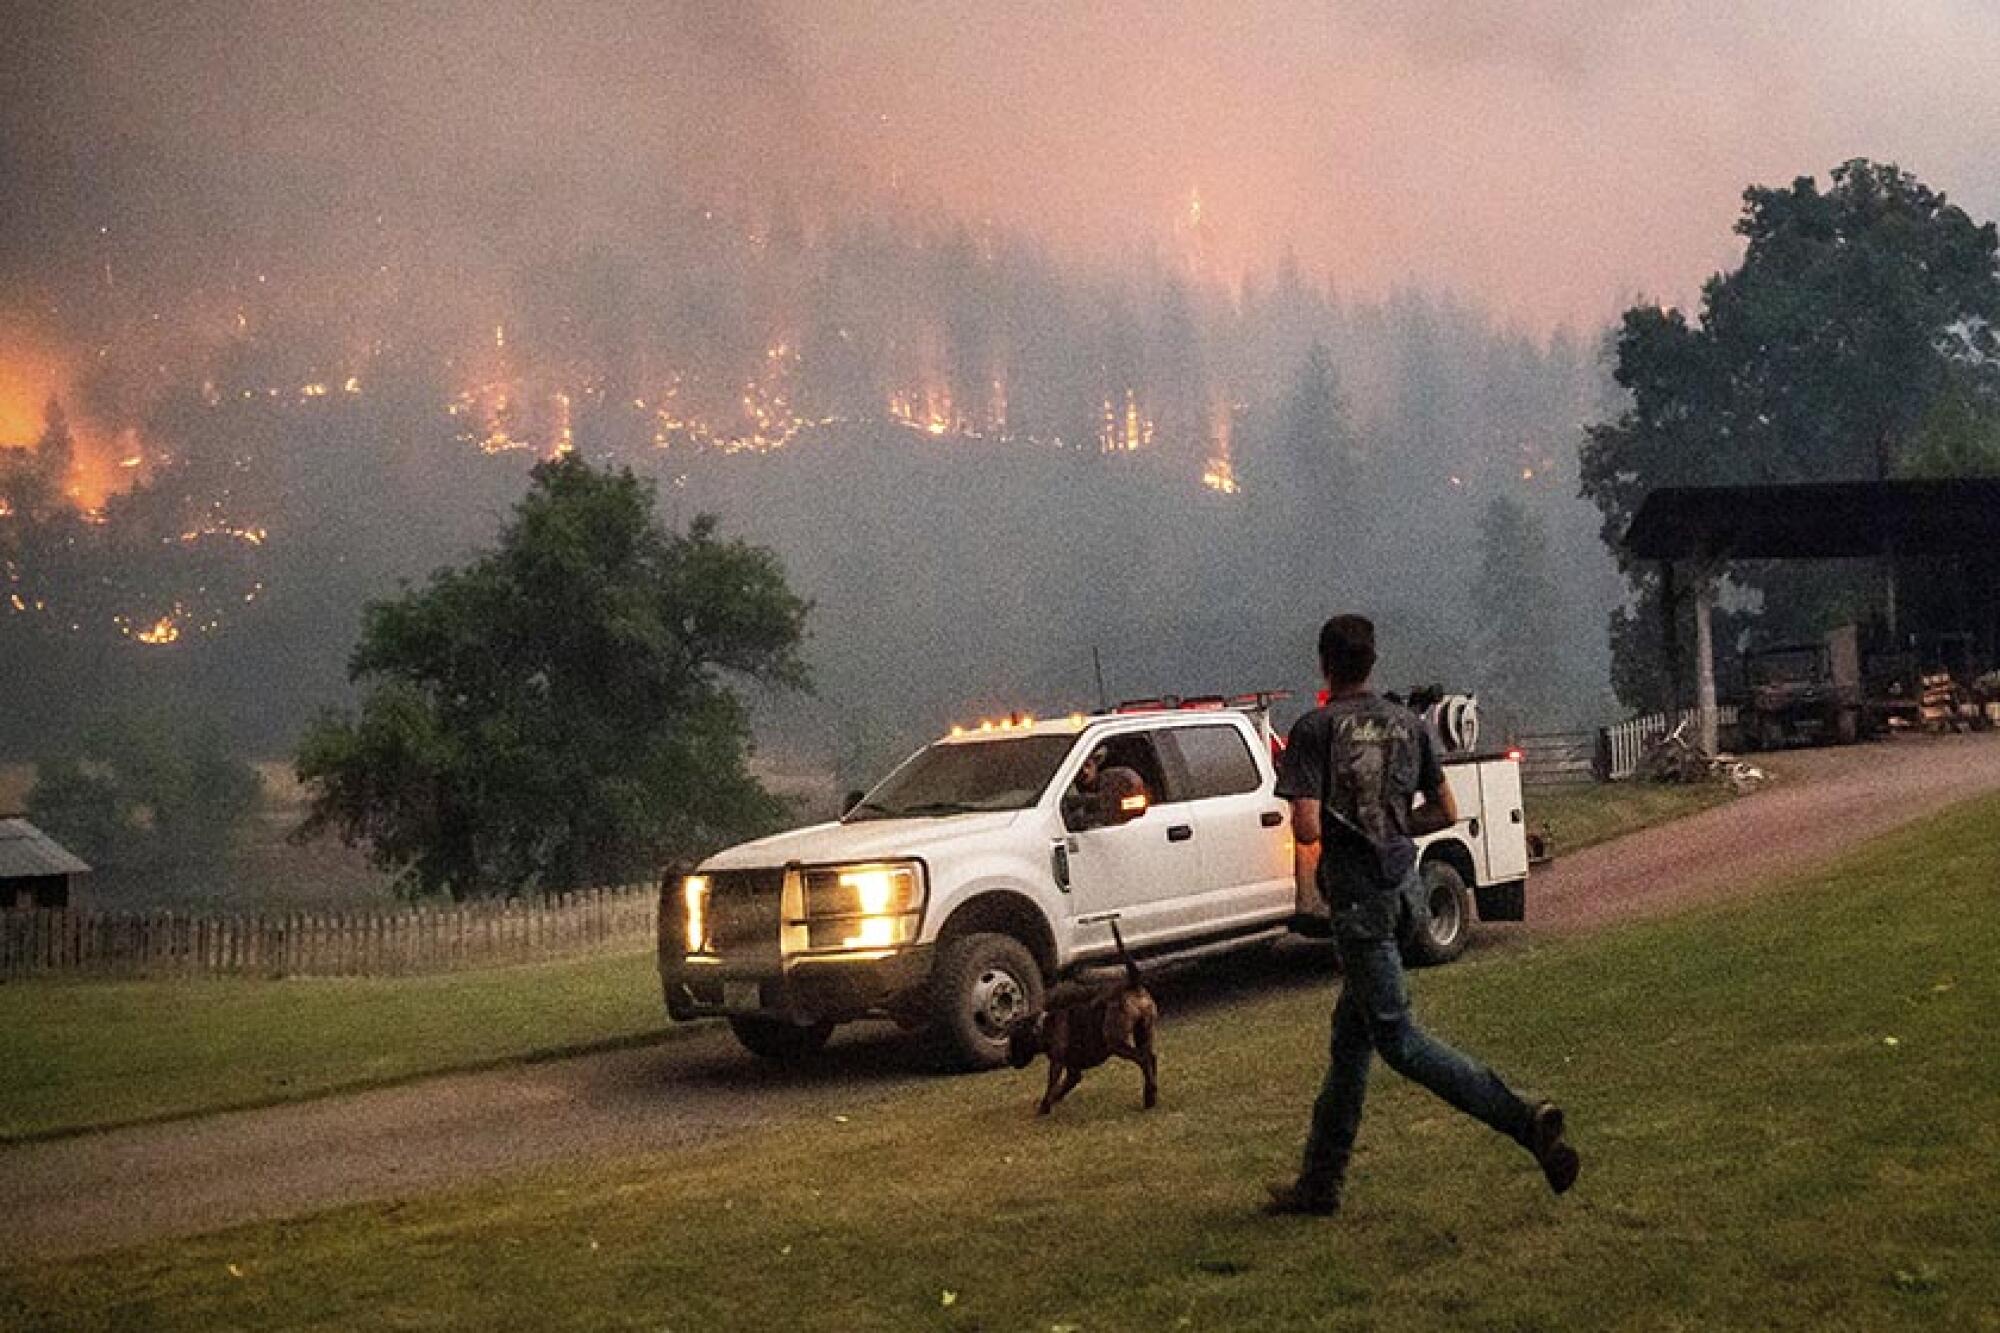 A man and his dog run to a pickup truck as wildfire burns a ridge nearby.